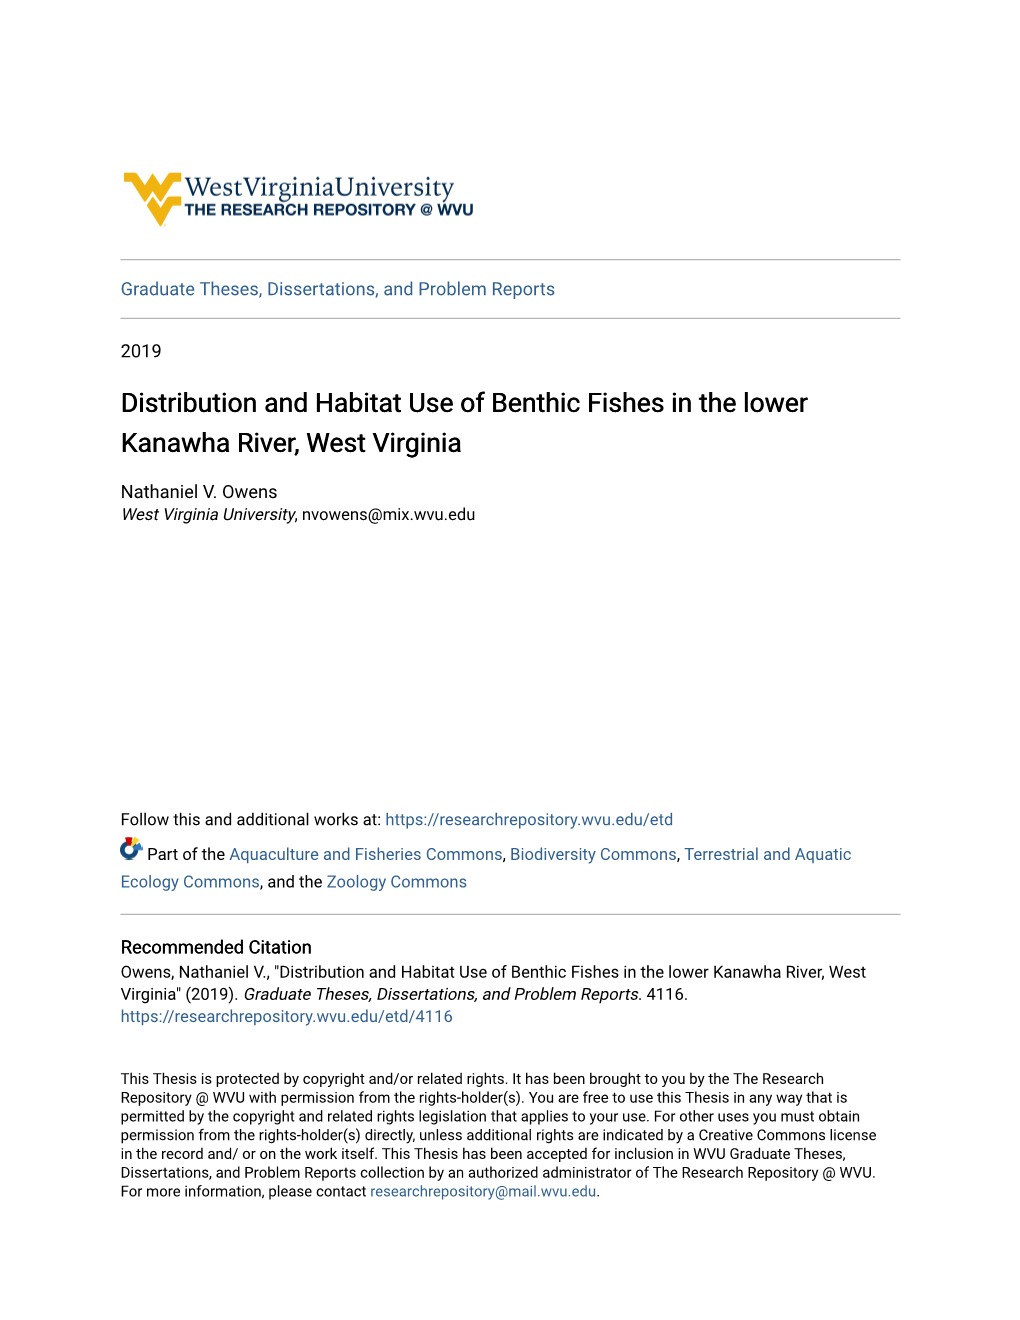 Distribution and Habitat Use of Benthic Fishes in the Lower Kanawha River, West Virginia